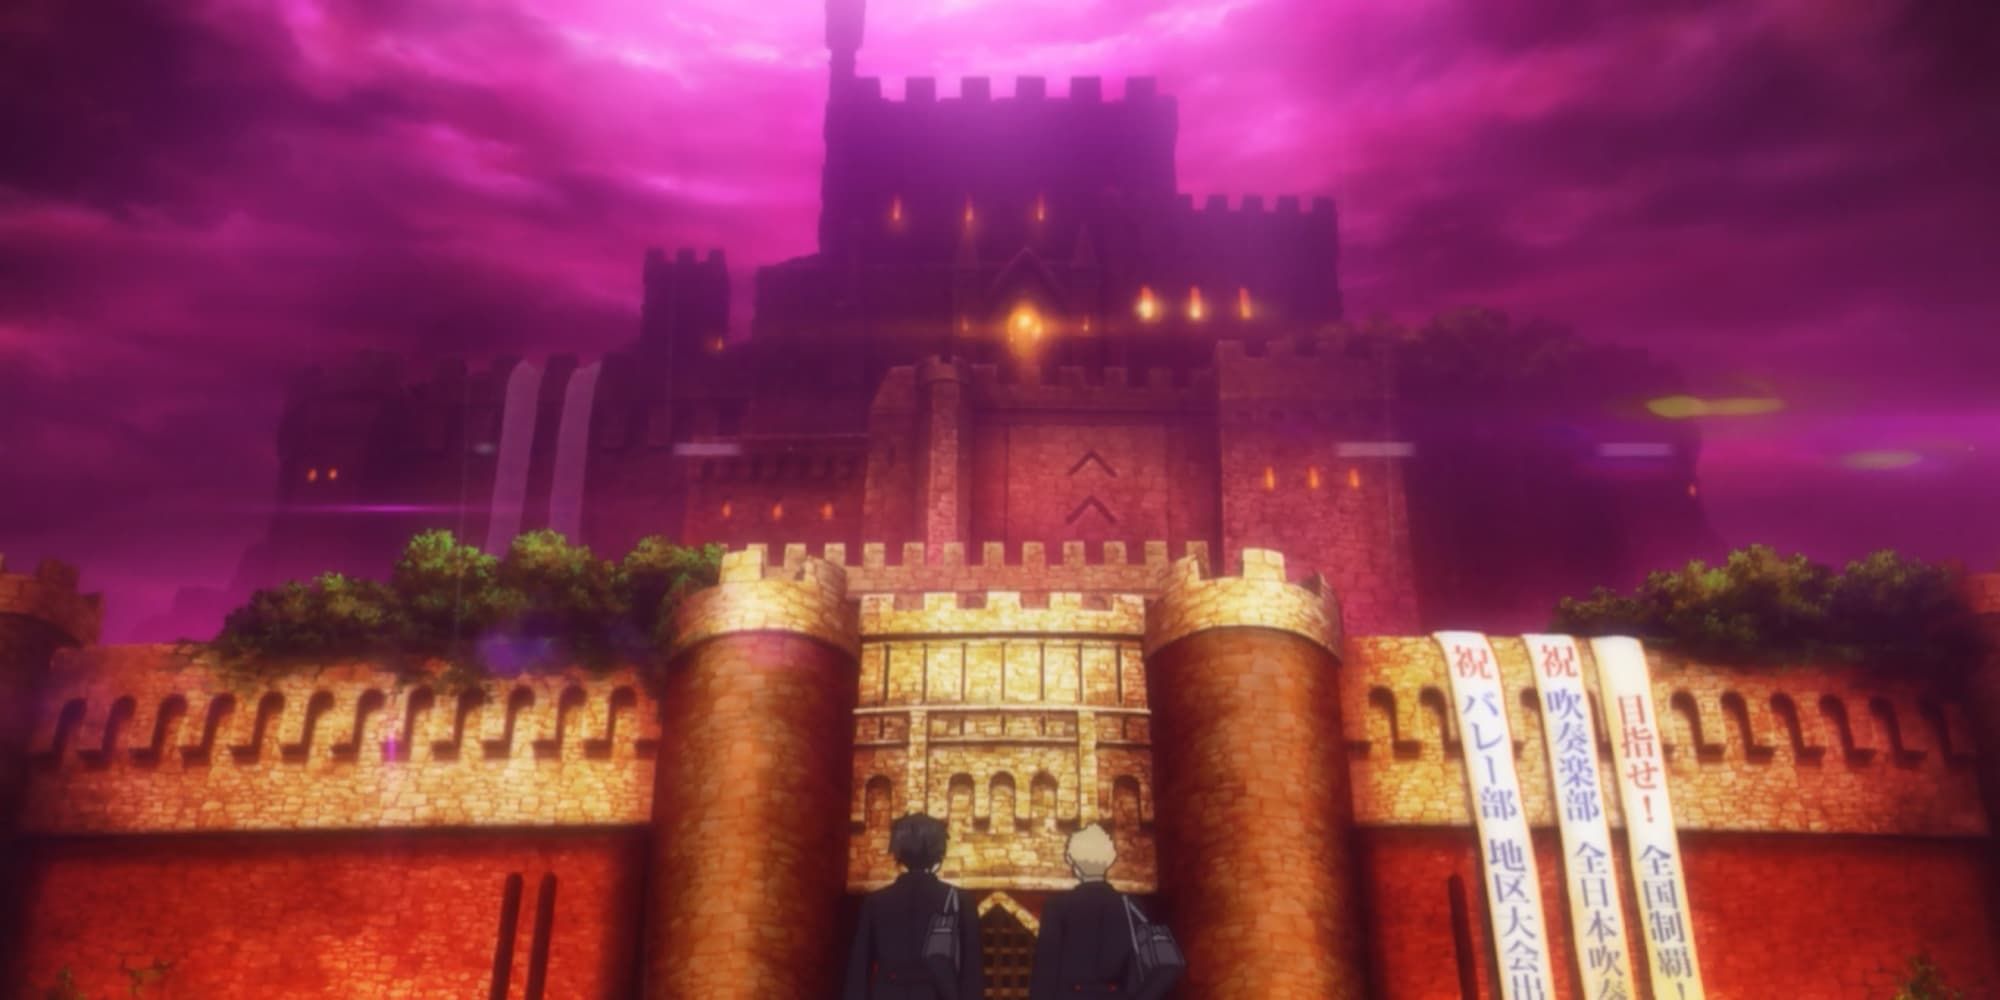 The player and Ryuuji stand in front of the castle